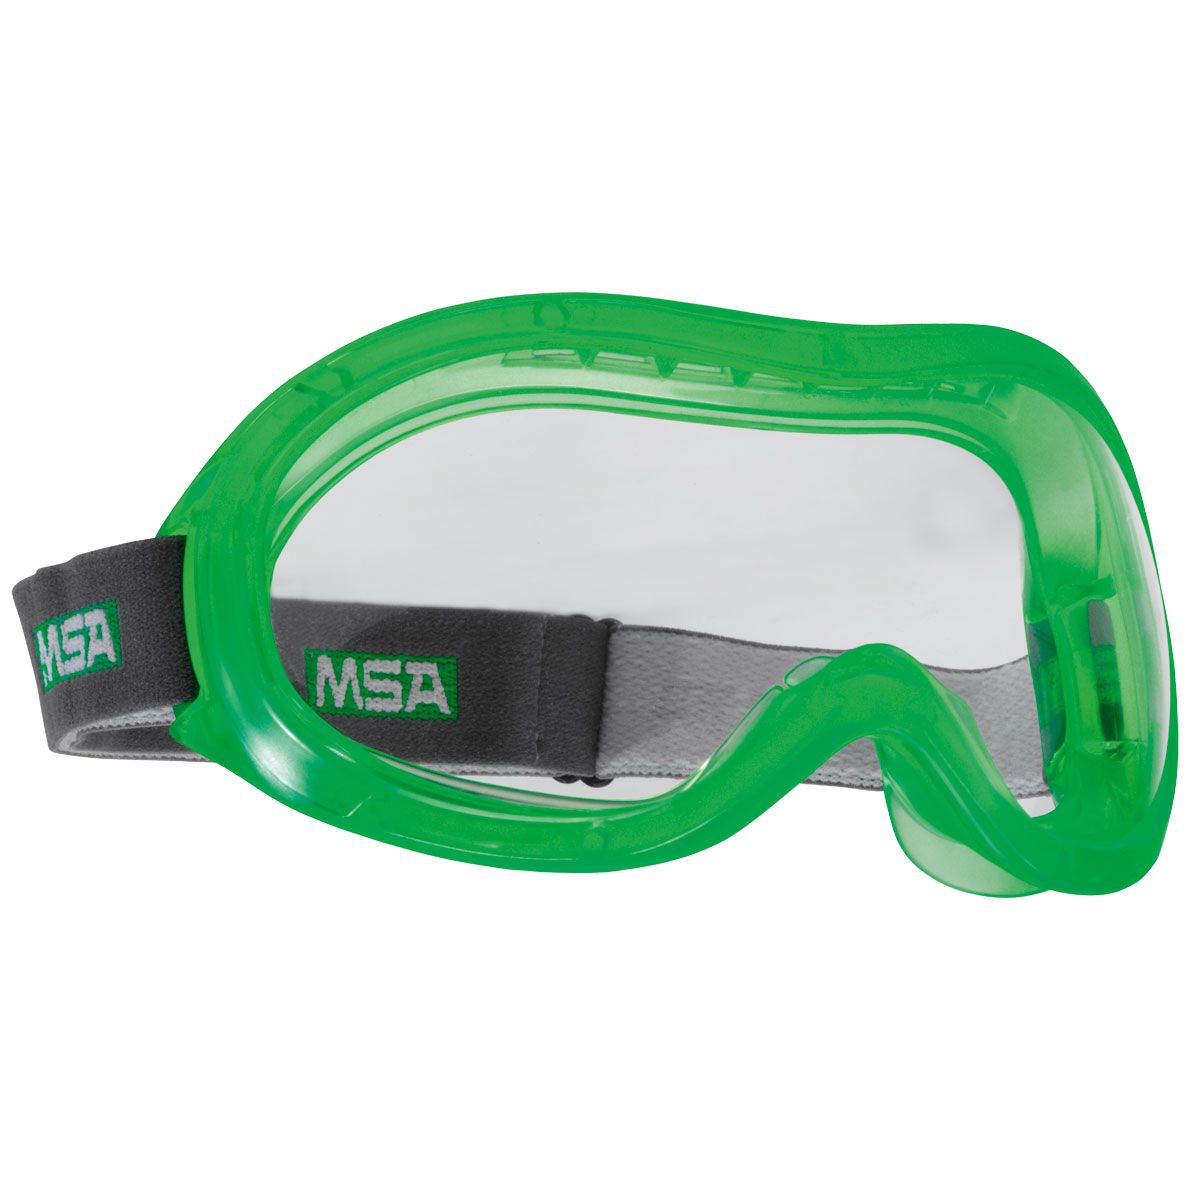 MSA Perspecta GIV 2300 full view safety goggles - for spectacle wearers - scratch & fog resistant - EN 166 - Green/Clear